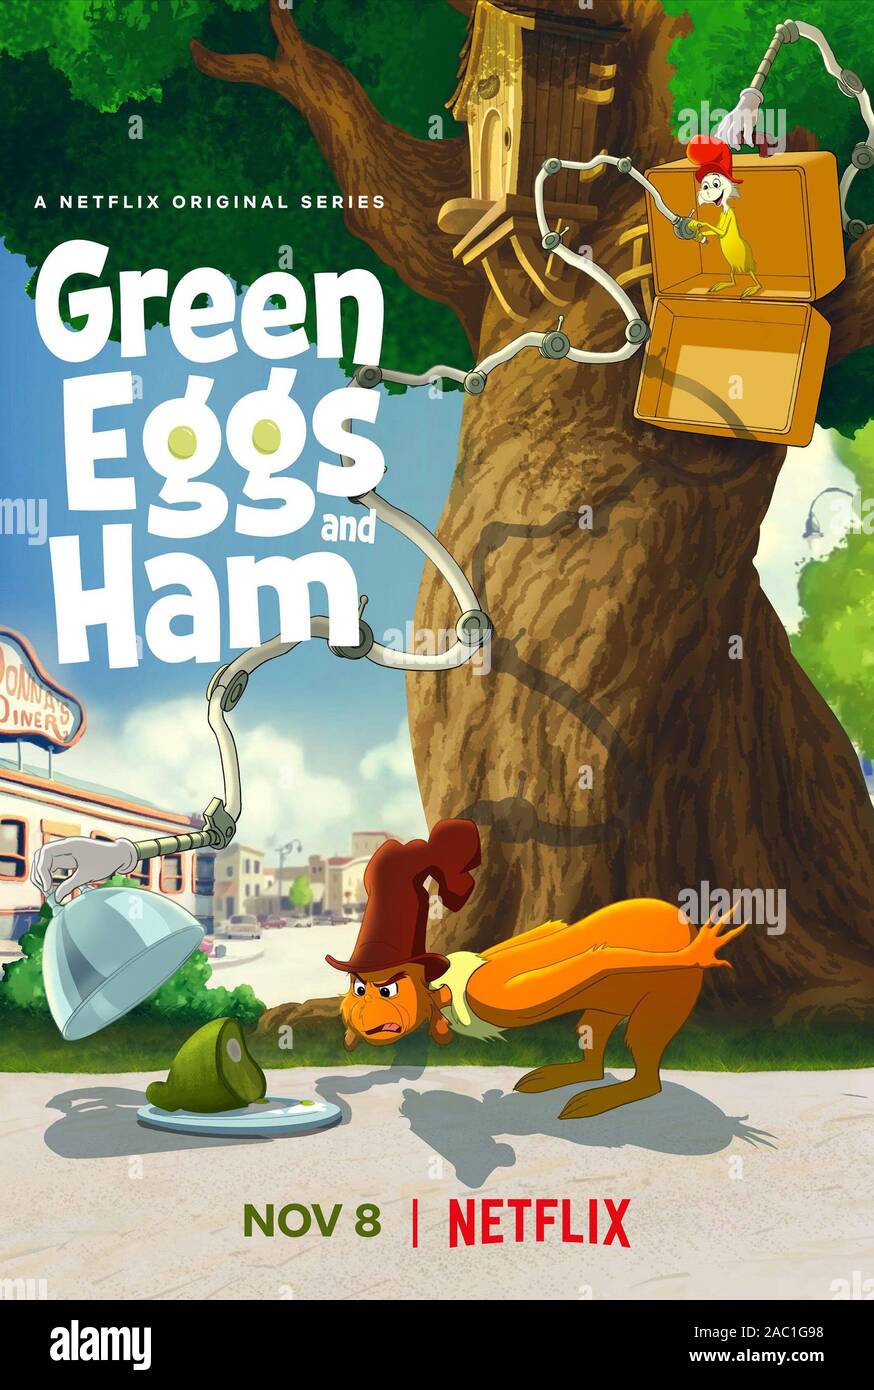 GREEN EGGS AND HAM (2019), directed by JARED STERN. Credit: WARNER BROS. ANIMATION / Album Stock Photo